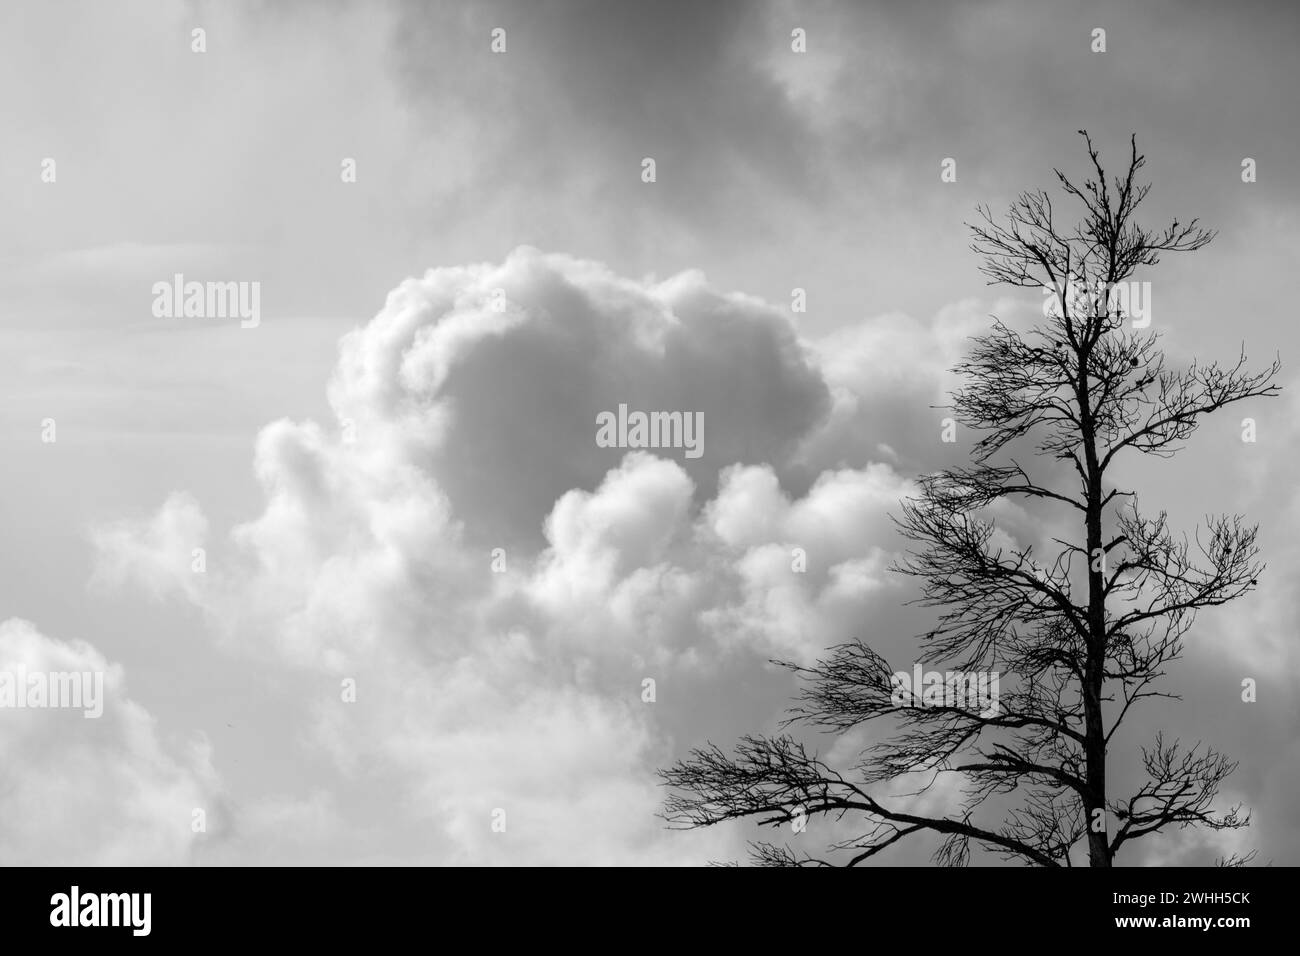 ominous black and white dark clouds in the sky before a storm with wooden silhouettes in the foreground Stock Photo